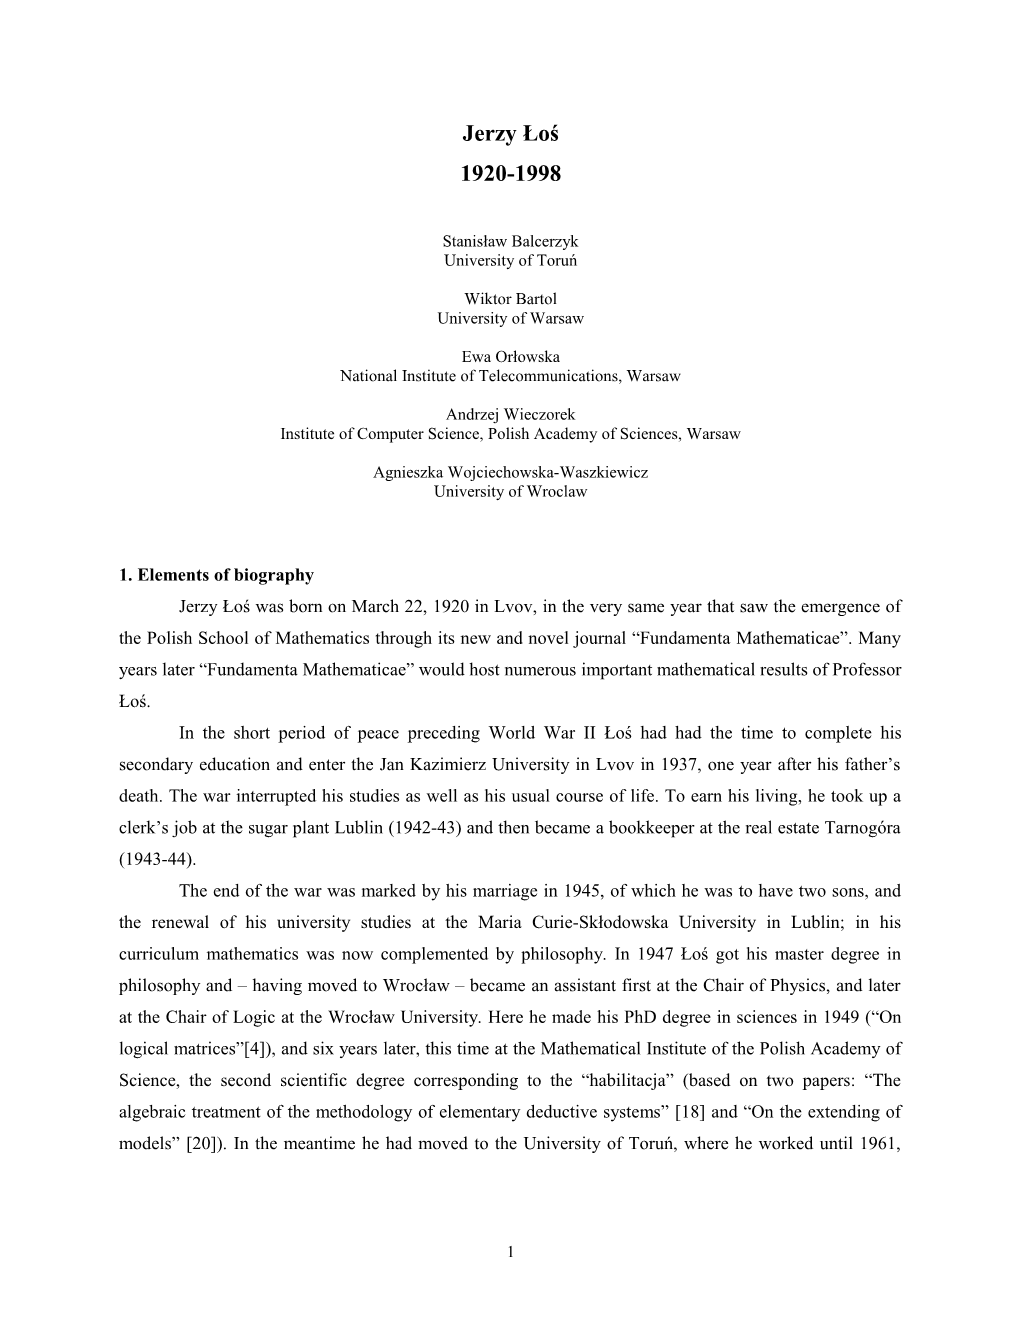 The First Papers of Ło